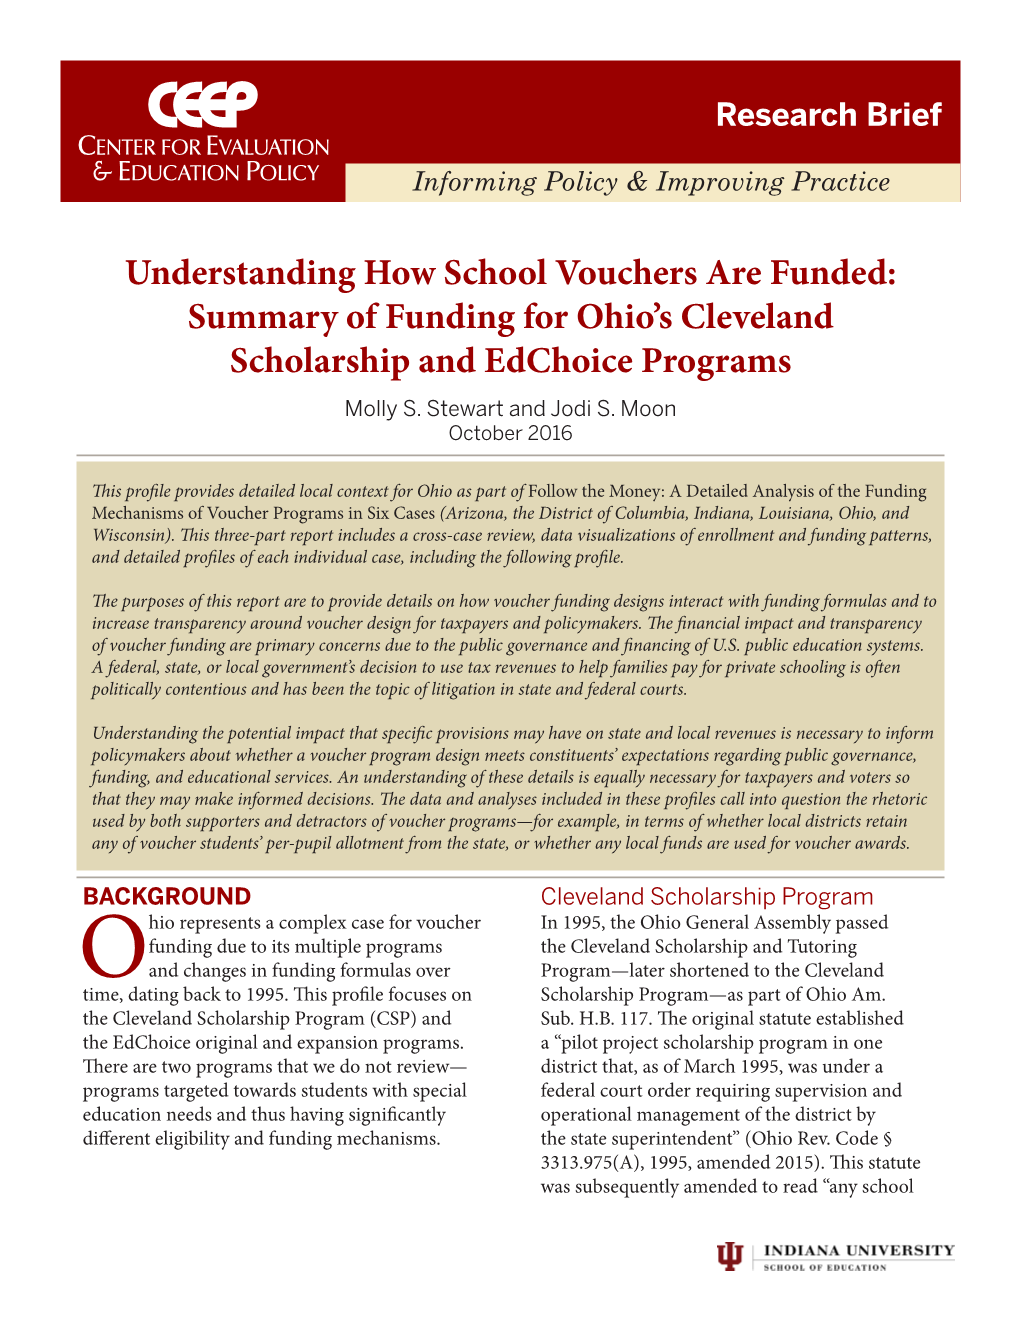 Understanding How School Vouchers Are Funded: Summary of Funding for Ohio’S Cleveland Scholarship and Edchoice Programs Molly S